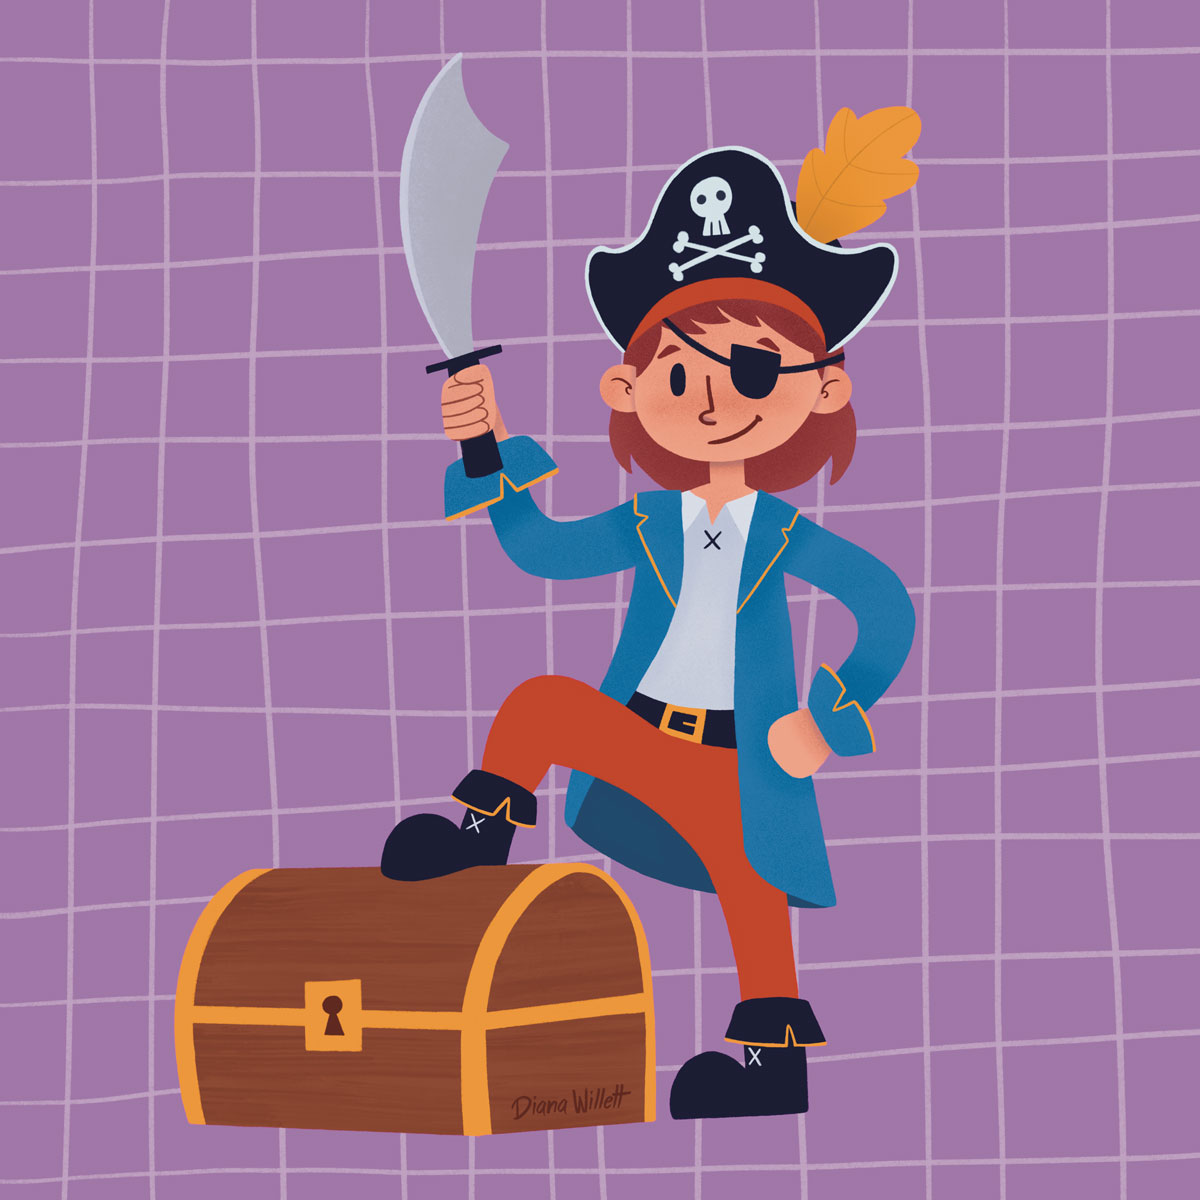 Kidlit Illustration by Diana Willett of child dressed as a pirate standing on a treasure chest and holding a toy sword.